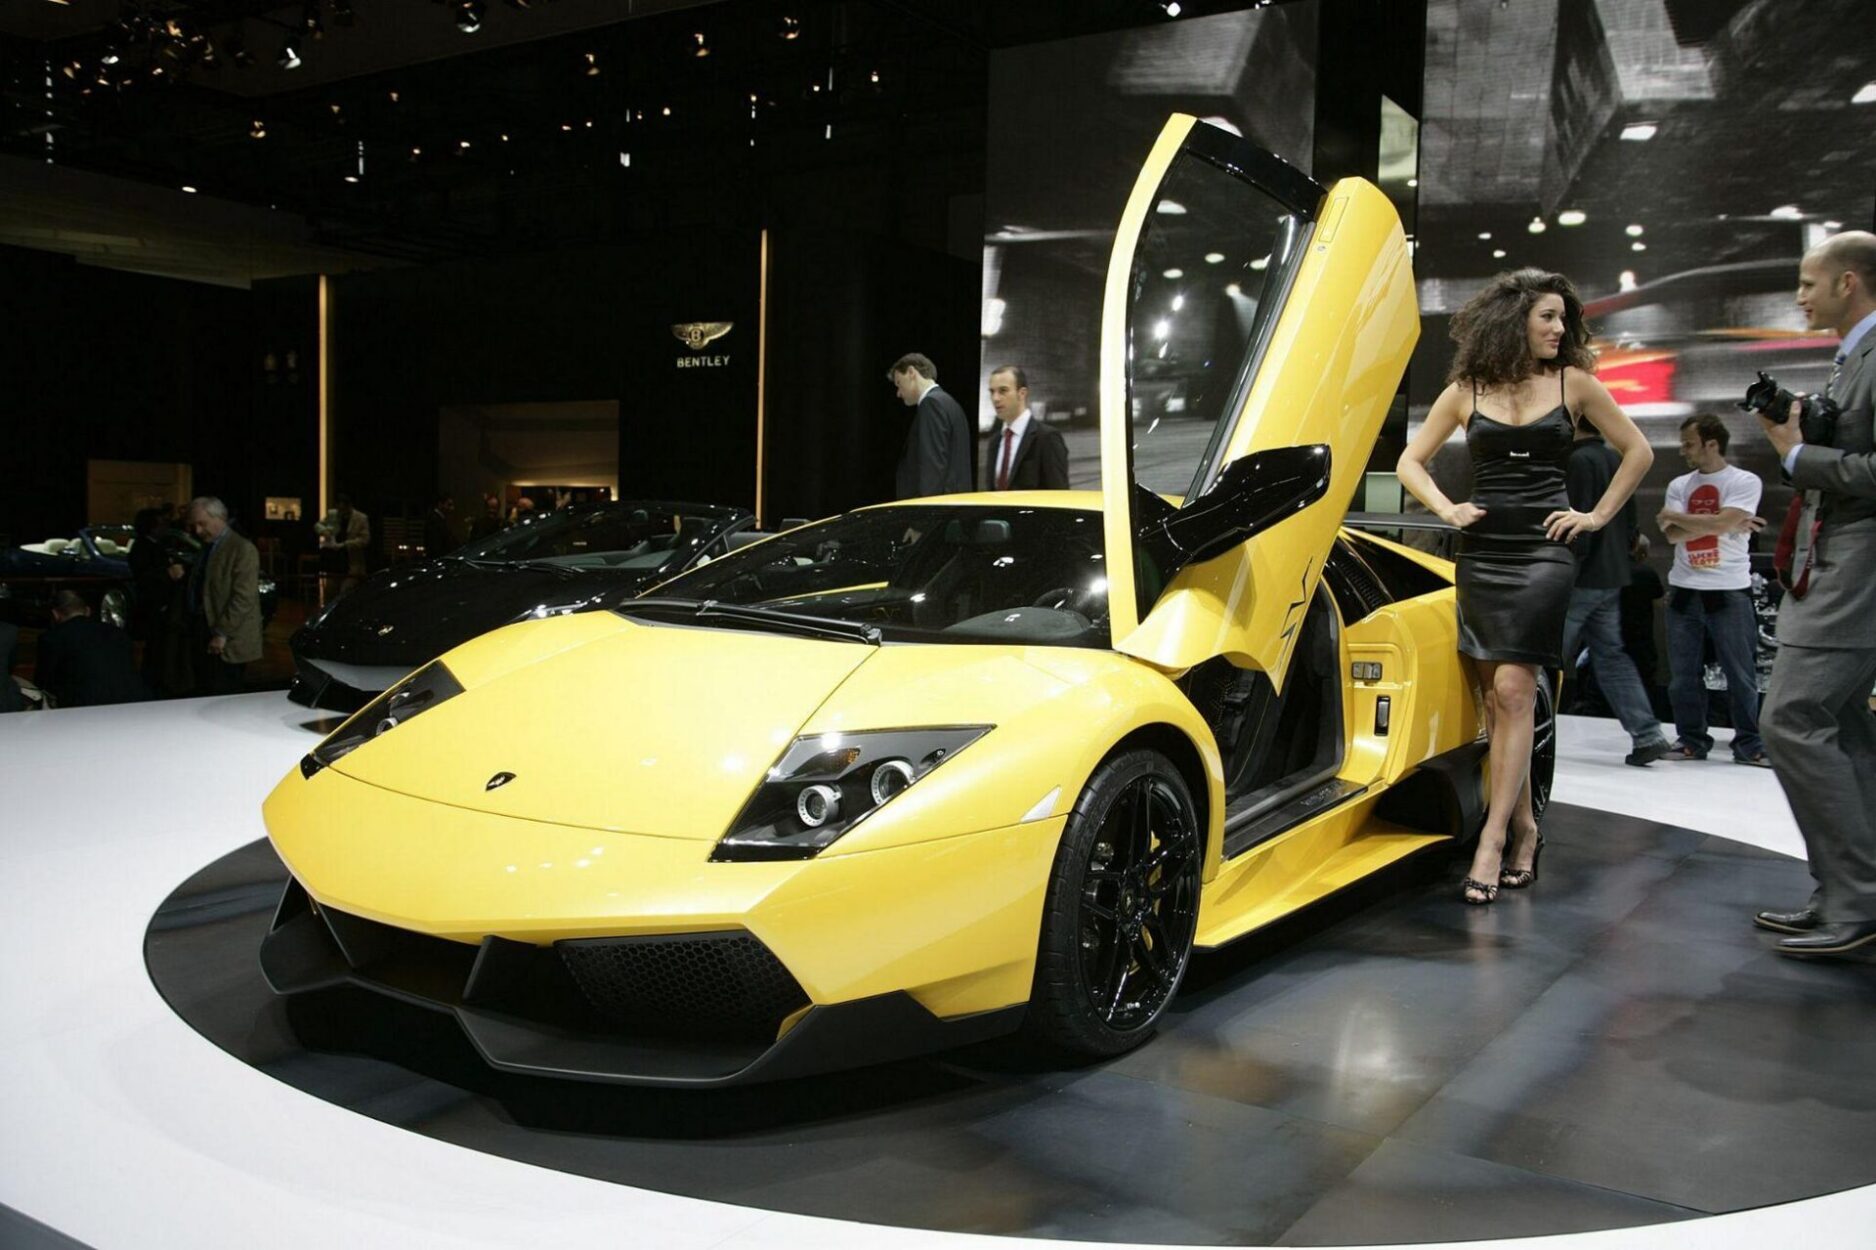 Top 5 most famous supercars in the world - Stacyknows